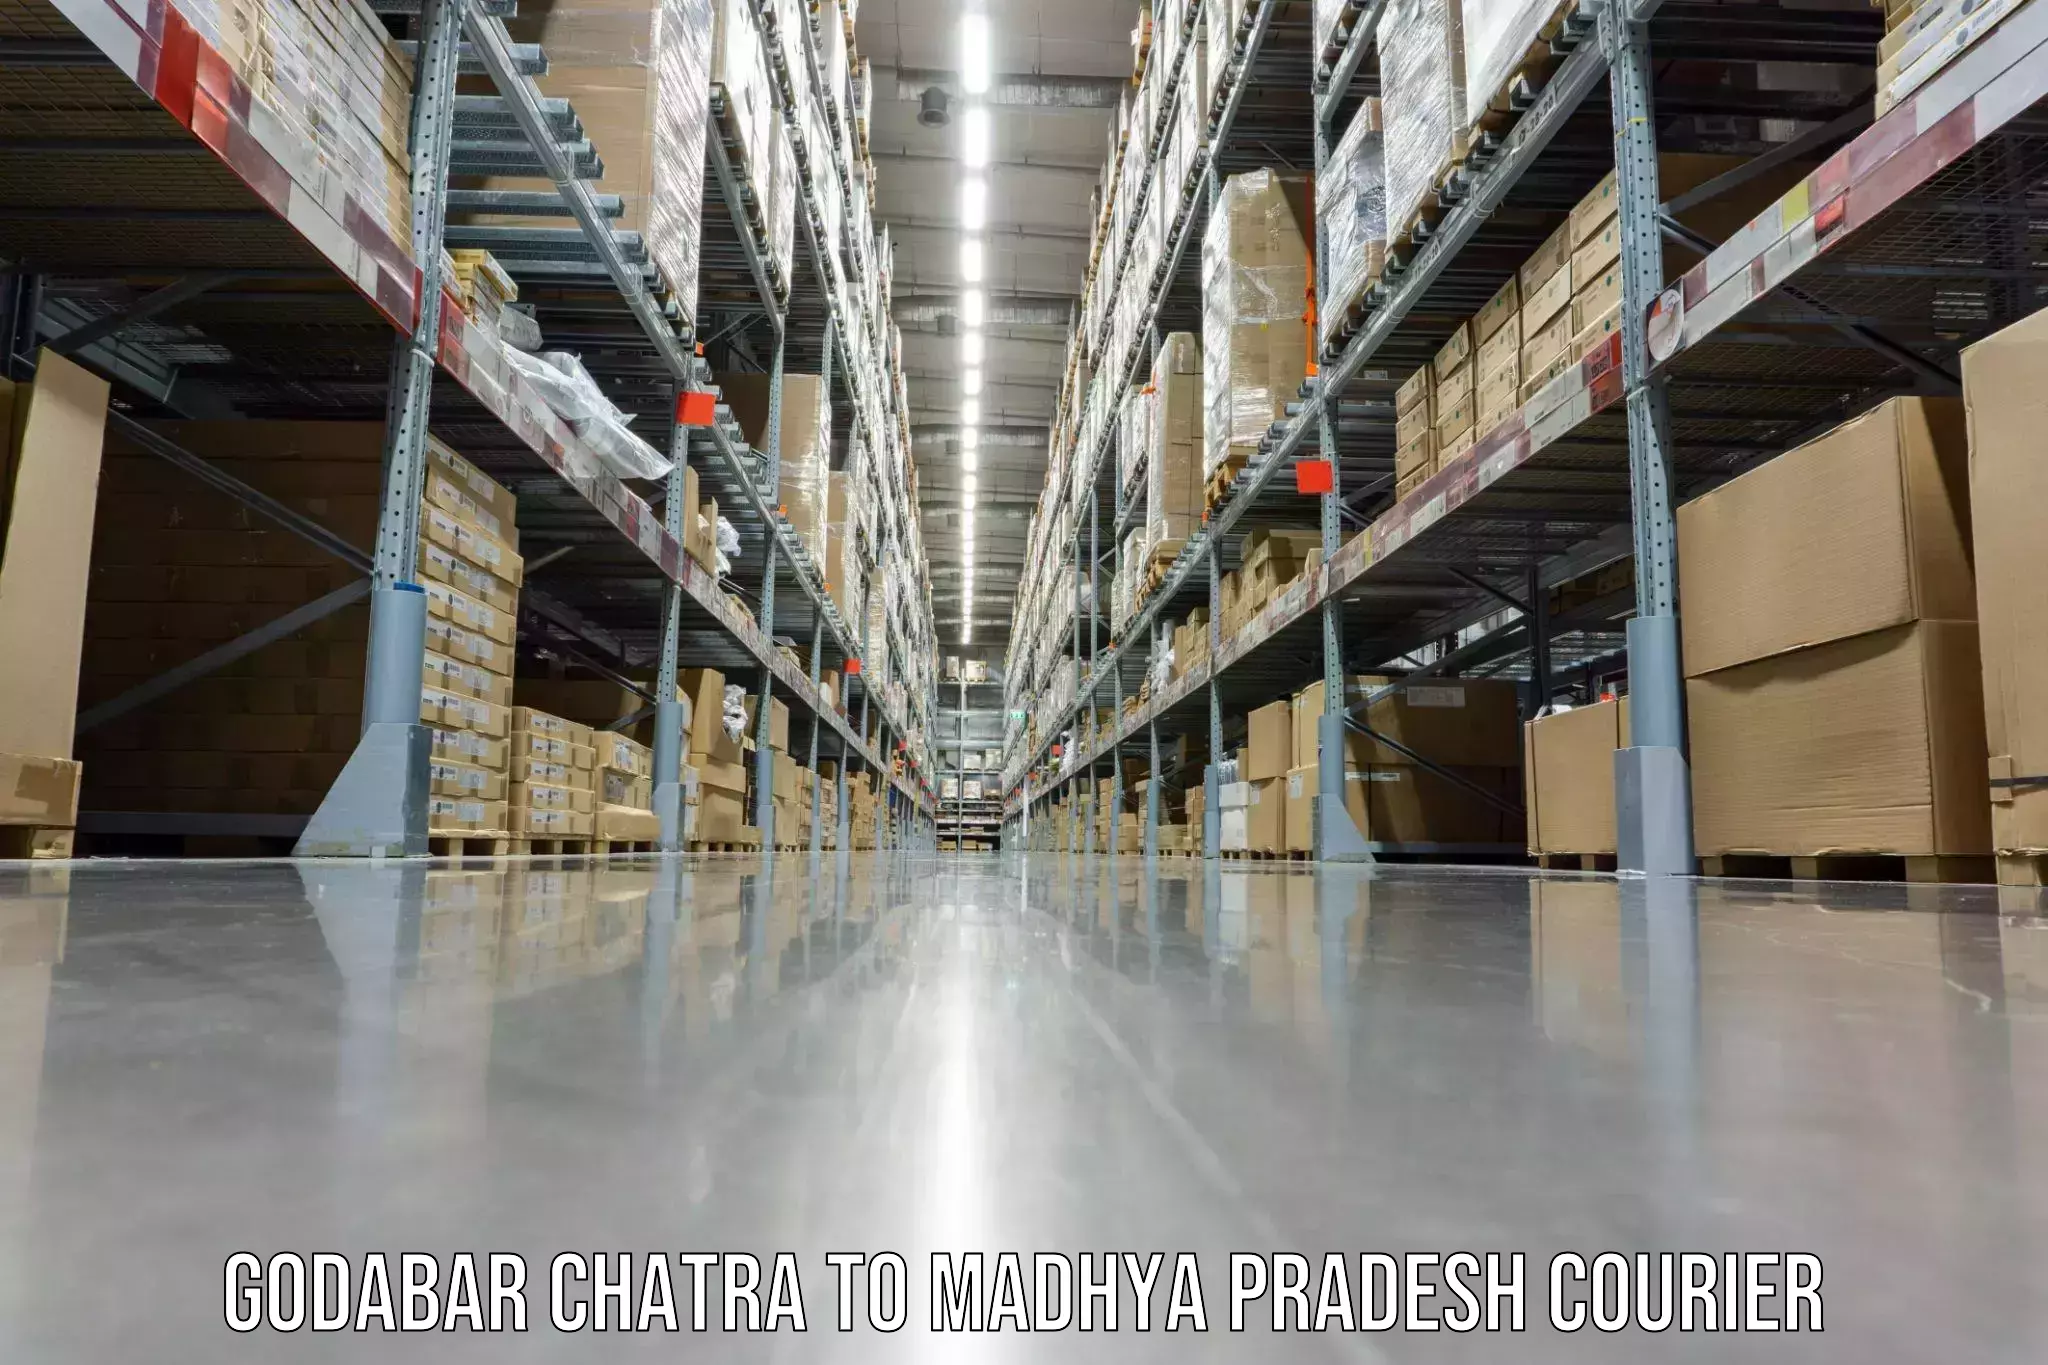 Furniture delivery service Godabar Chatra to Balaghat